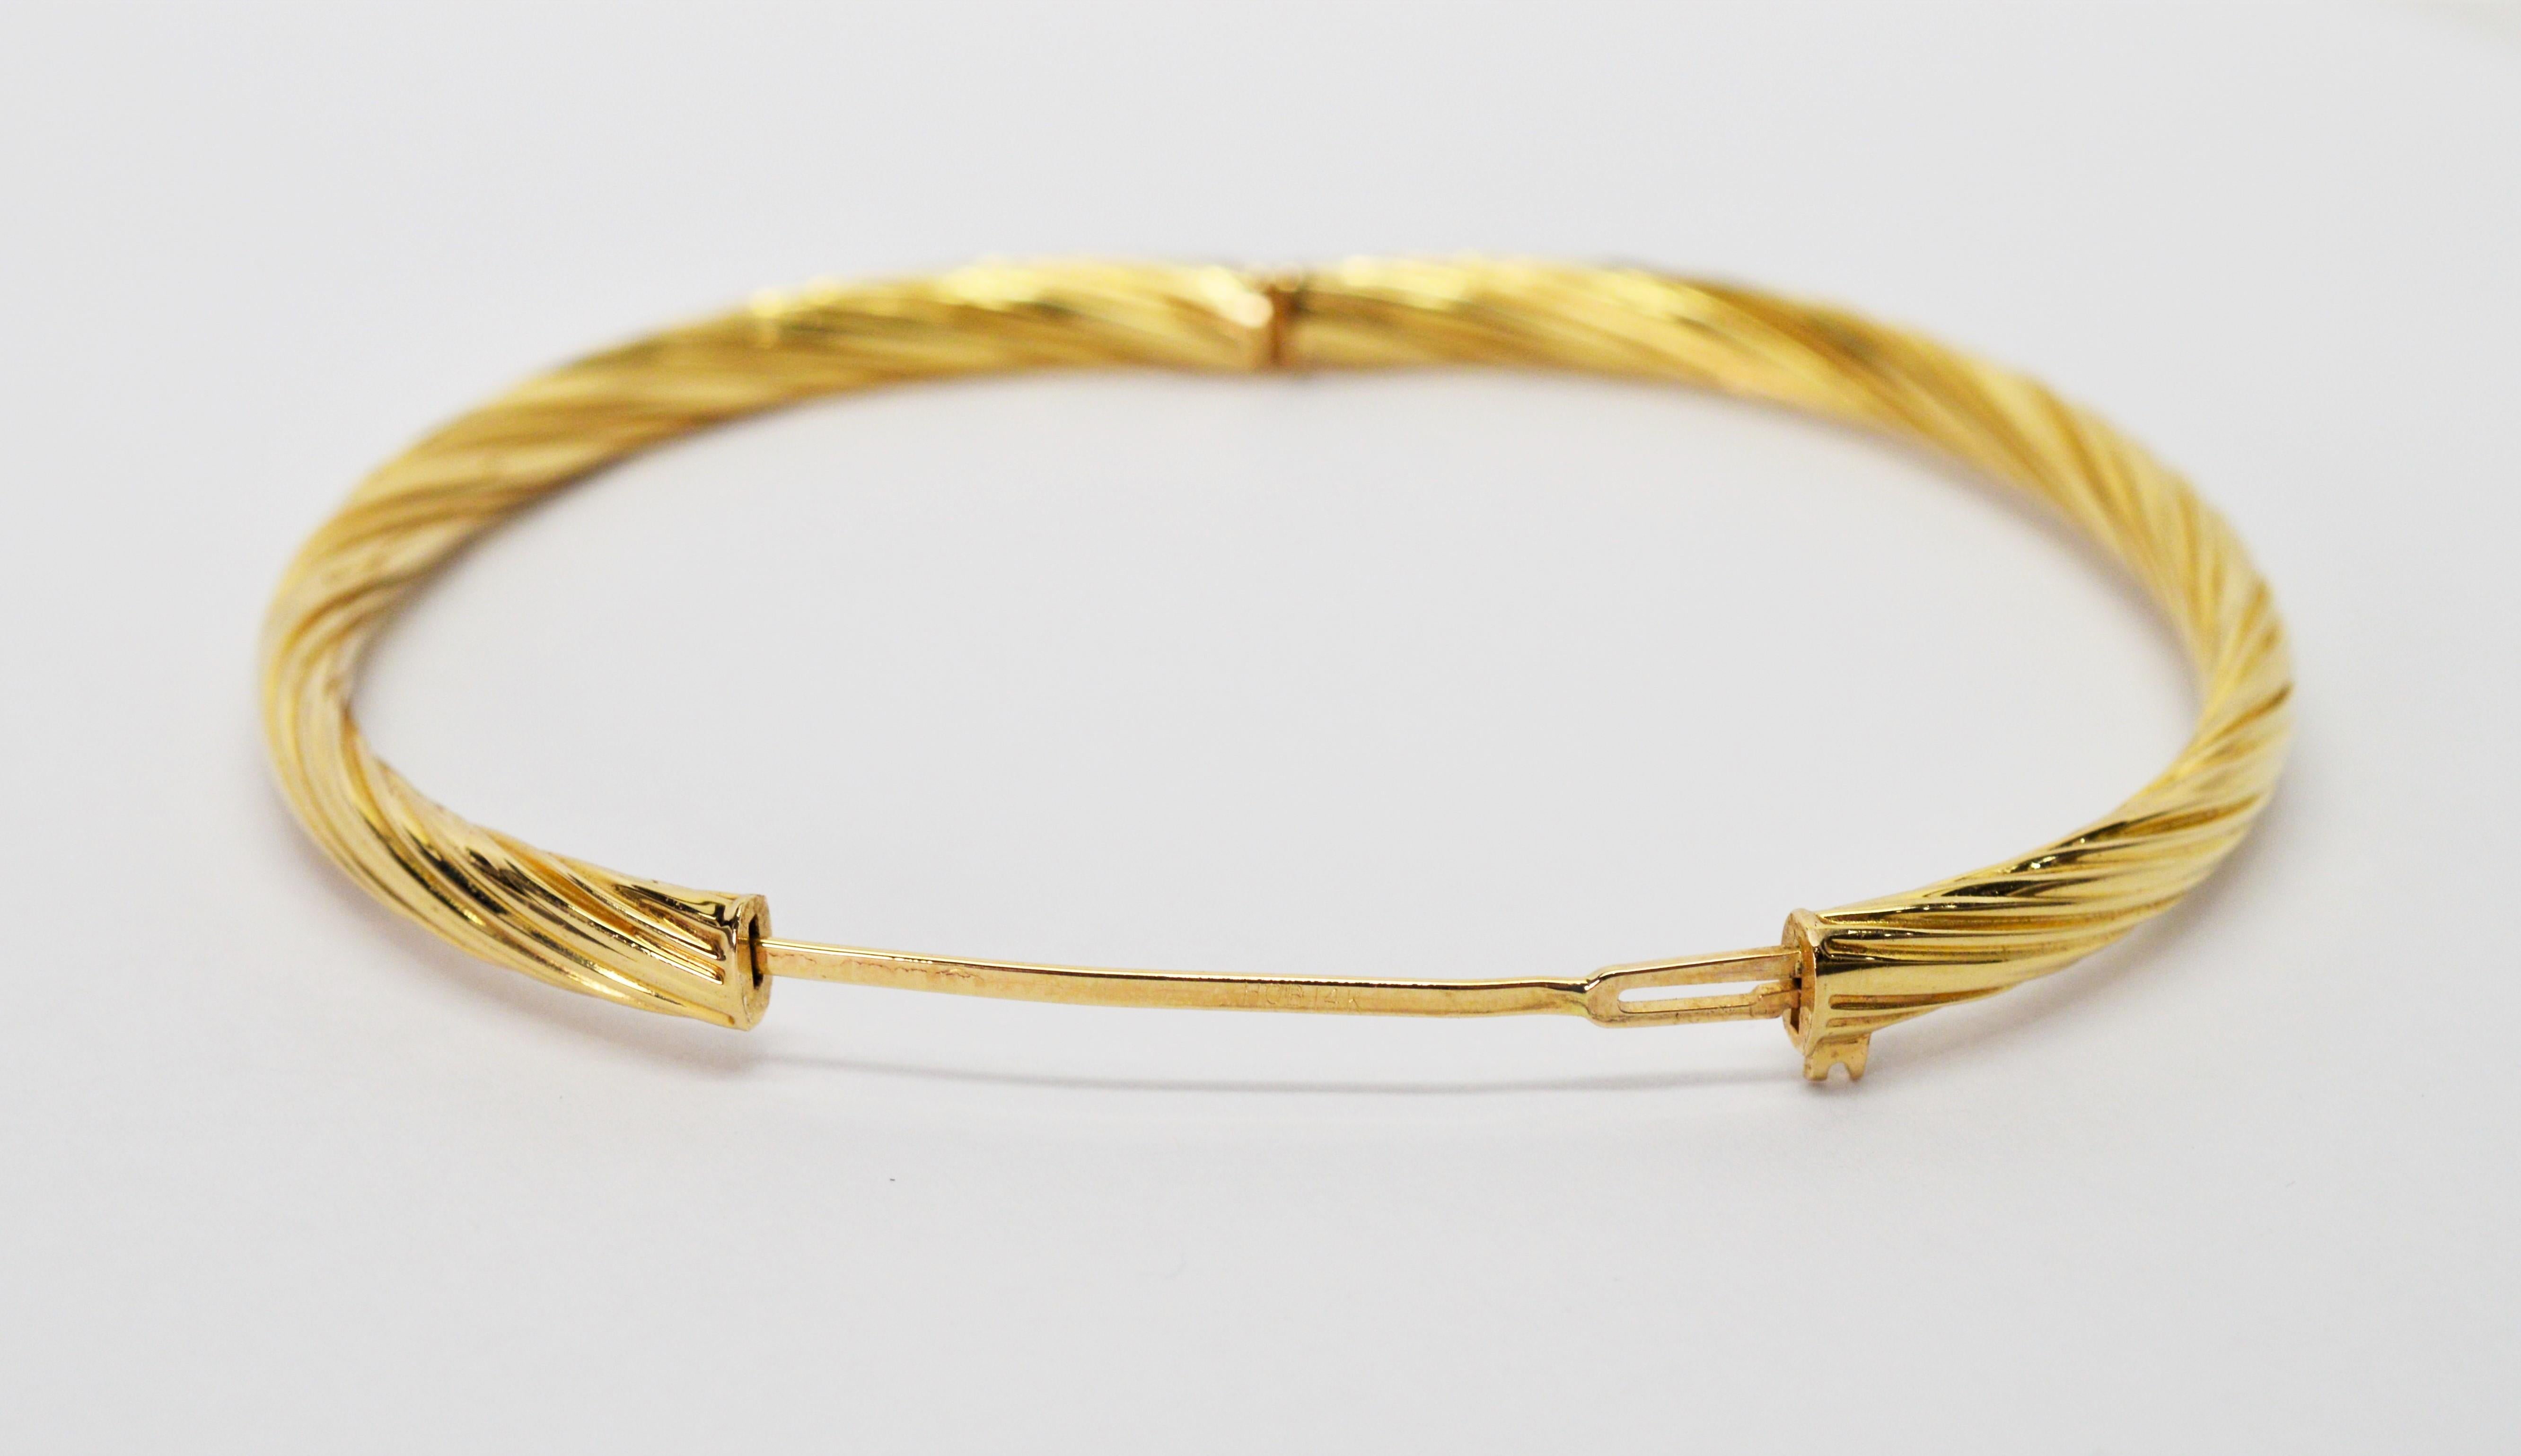 In fourteen carat 14K yellow gold, this HOB signed bangle bracelet has a versatile and classic twist design. Fitted with a hinge and plunger clasp, the bracelet's inside measurements are 2-1/4 x 2 inches. (Linear measurement 7 inches).  In gift box.